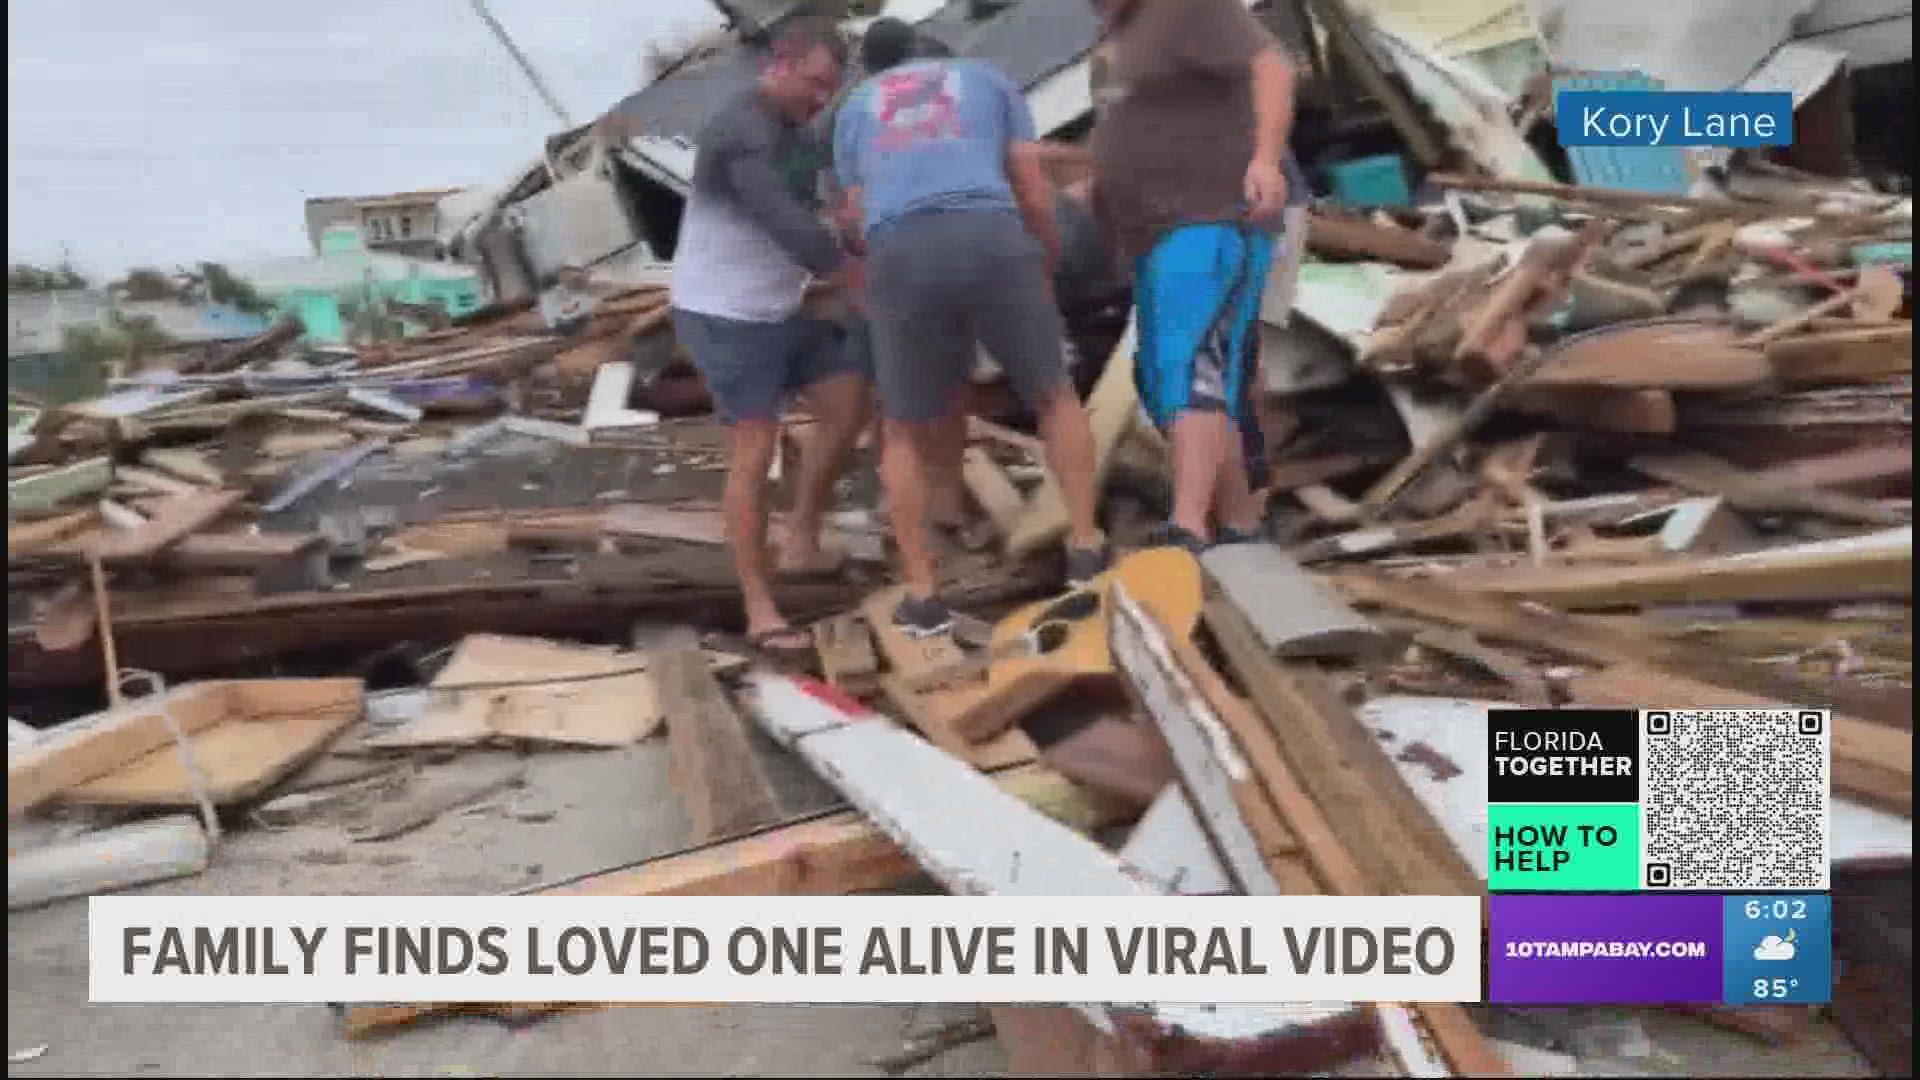 Good Samaritans rescued the 89-year-old man from the rubble after Hurricane Ian tore through Fort Myers.